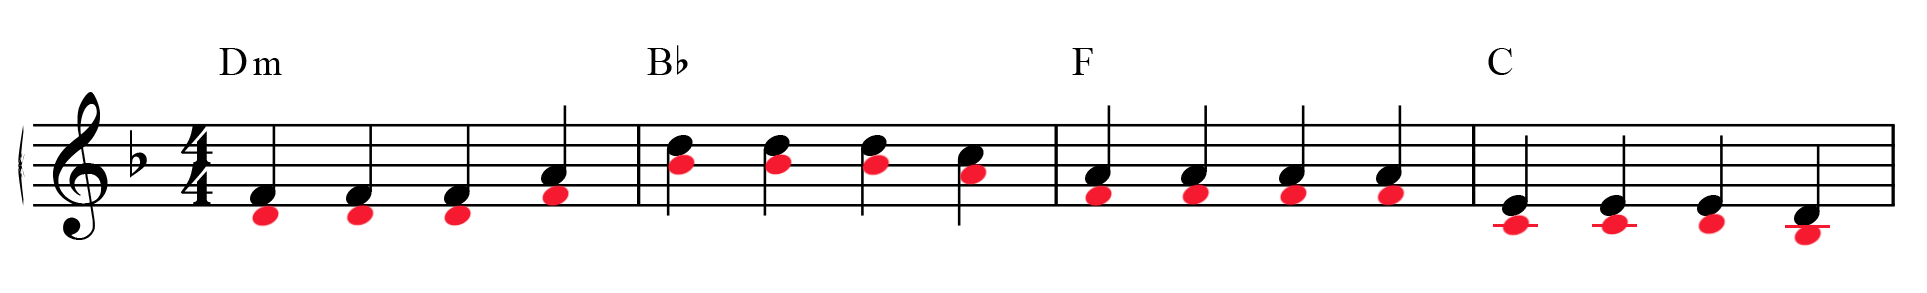 Main melody of Faded by Alan Walker with notes in red added a third under each note.